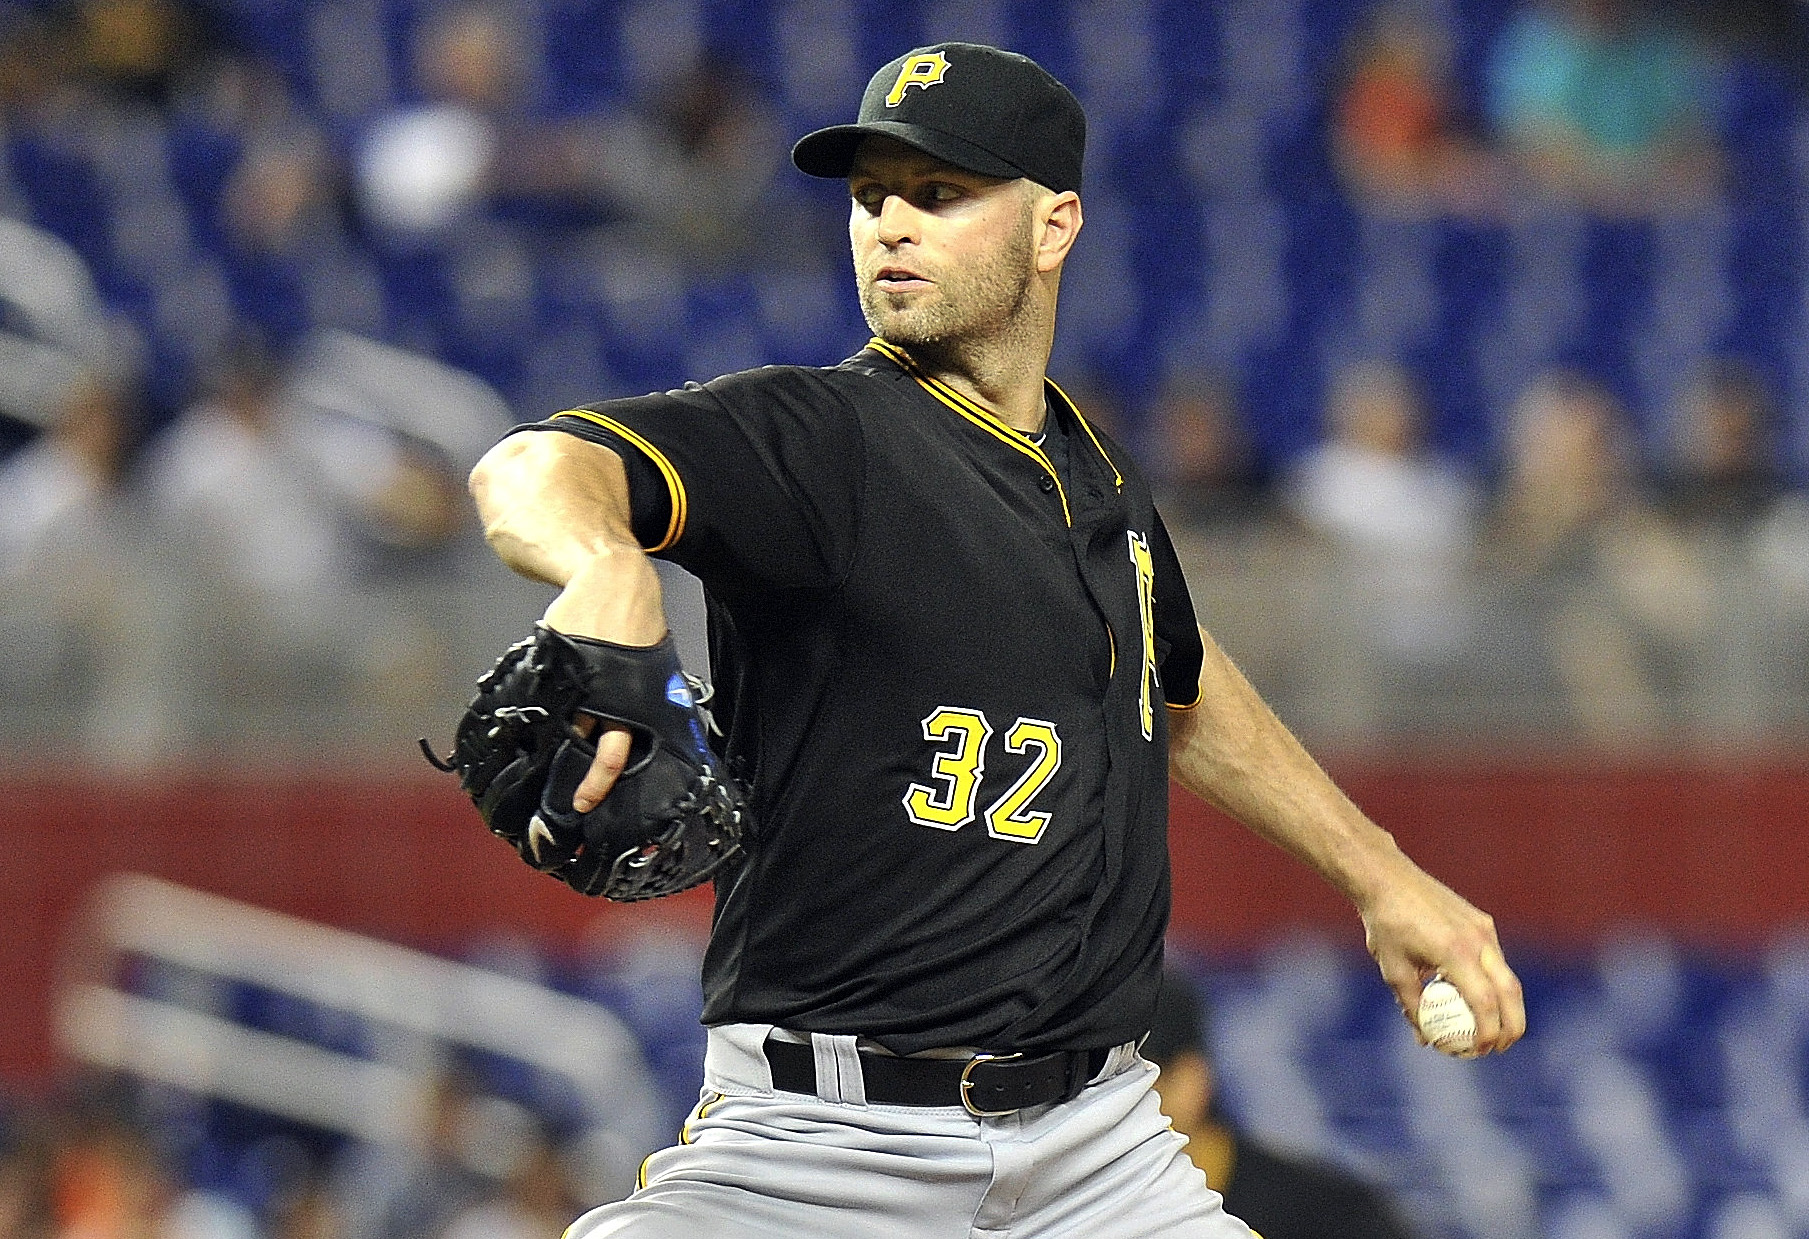 In six starts since joining the Pirates, J.A. Happ has a 2.27 FIP.